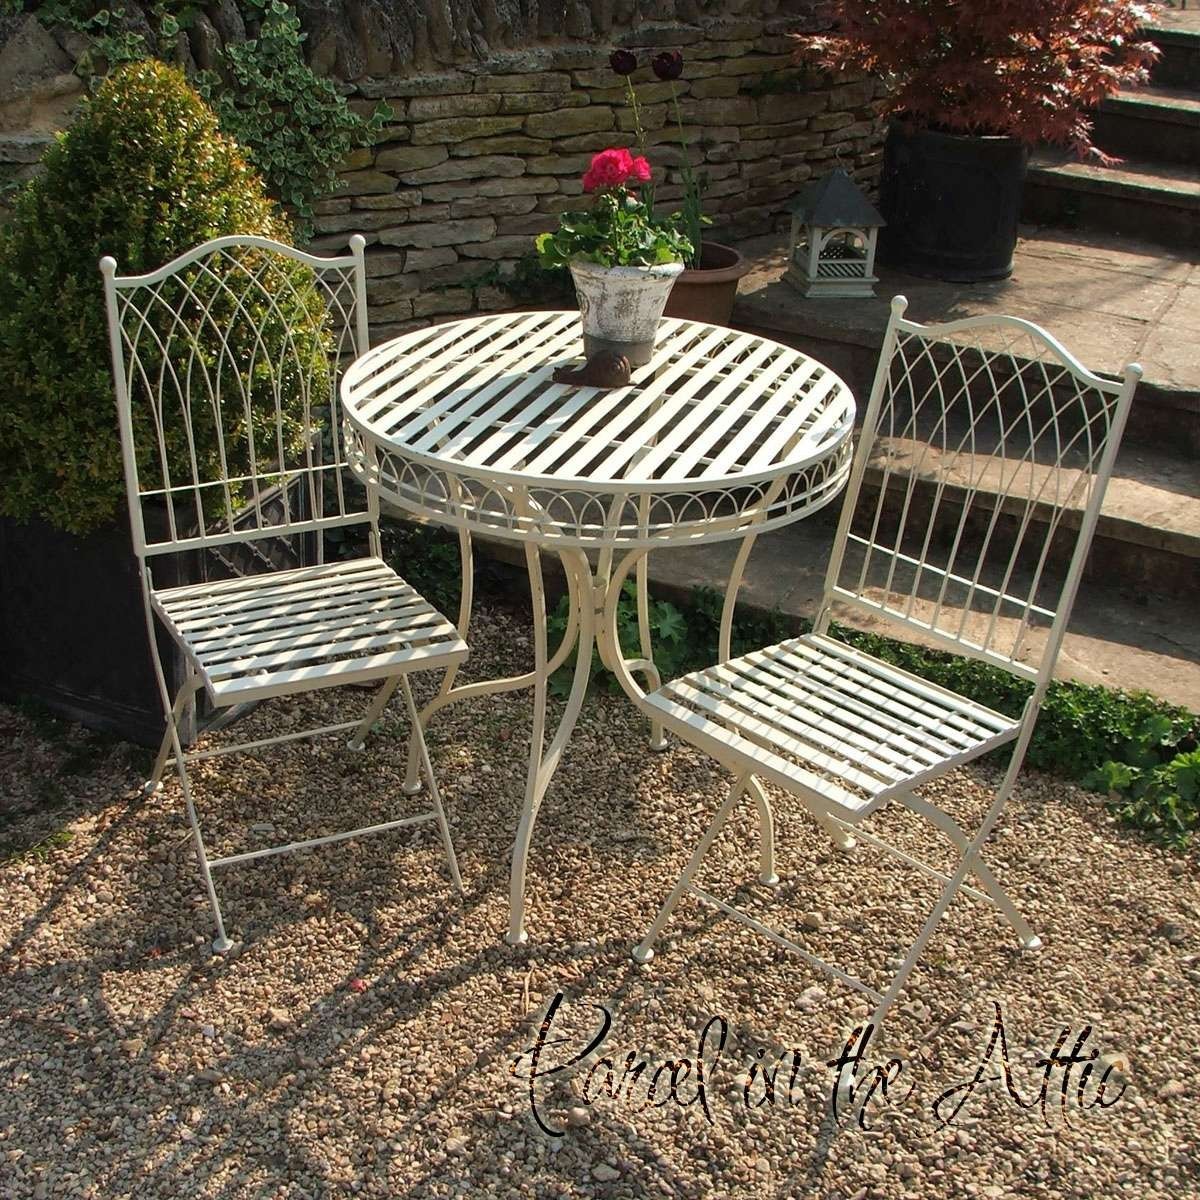 Livorno Wrought Iron Bistro Set - Folding Table & 2 Folding Chairs in Cream